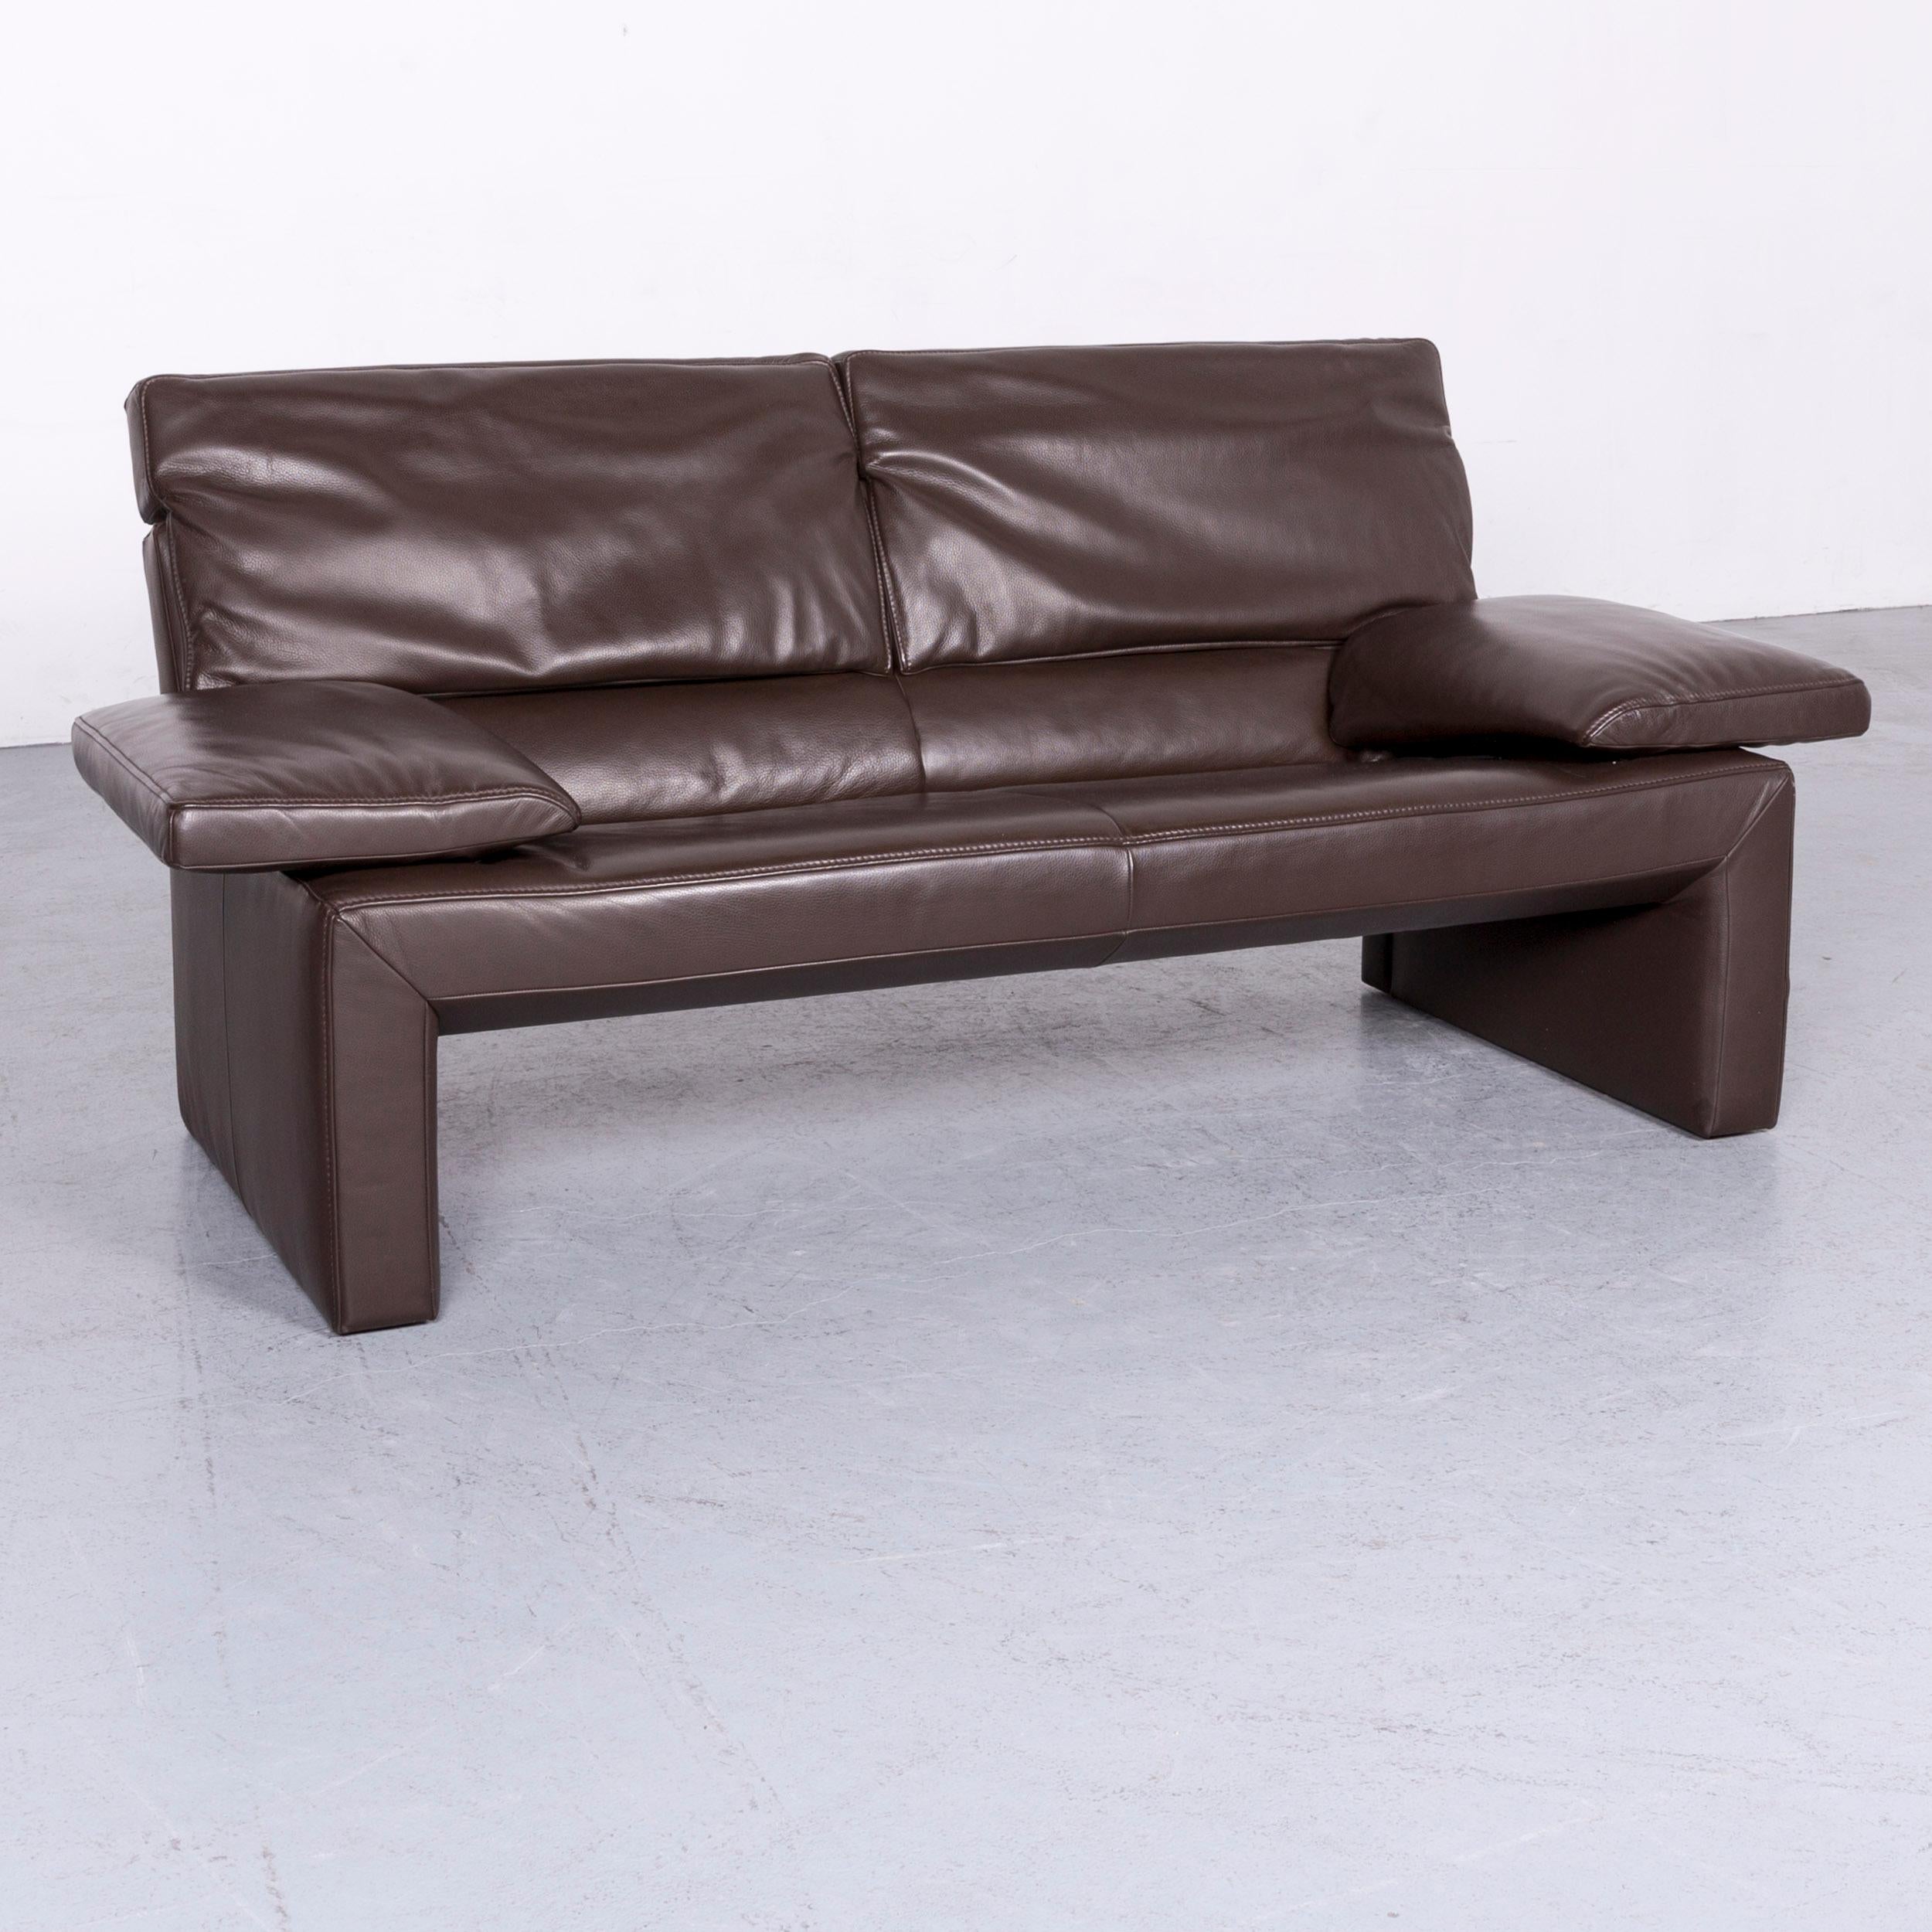 We bring to you a jori espalda designer leather sofa brown two-seat couch.